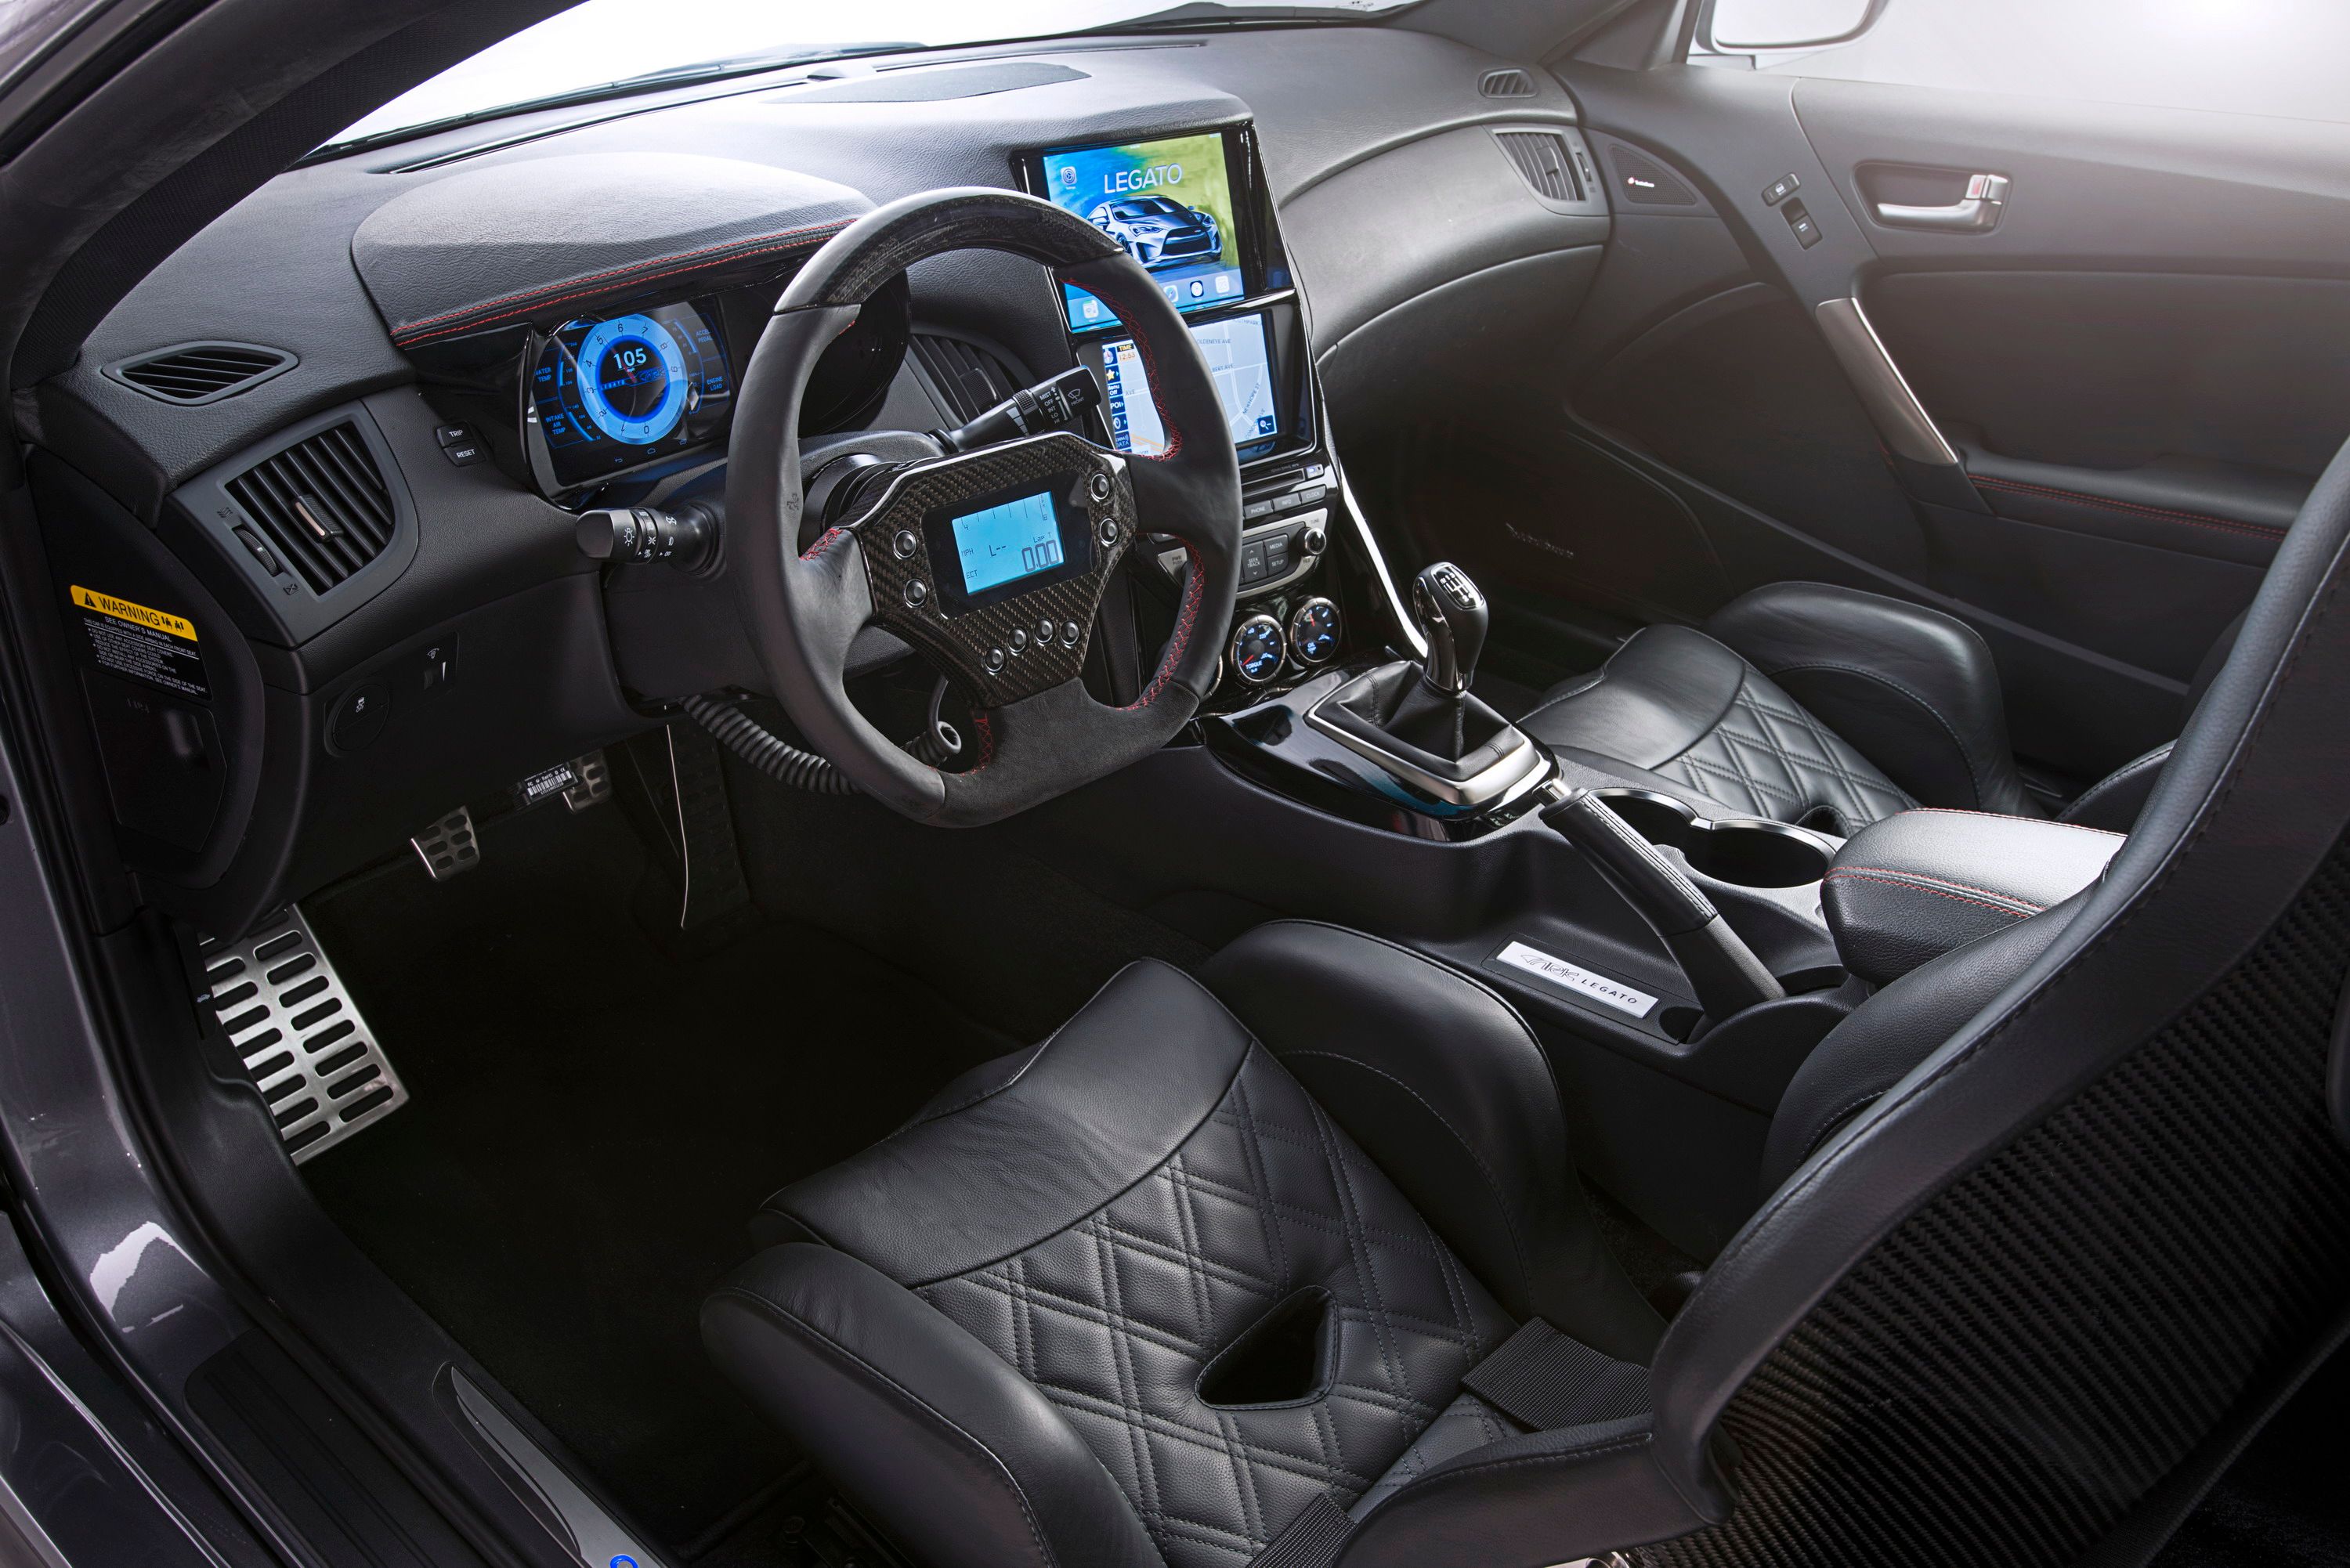 2013 Hyundai Genesis Coupe Legato Concept by ARK Performance